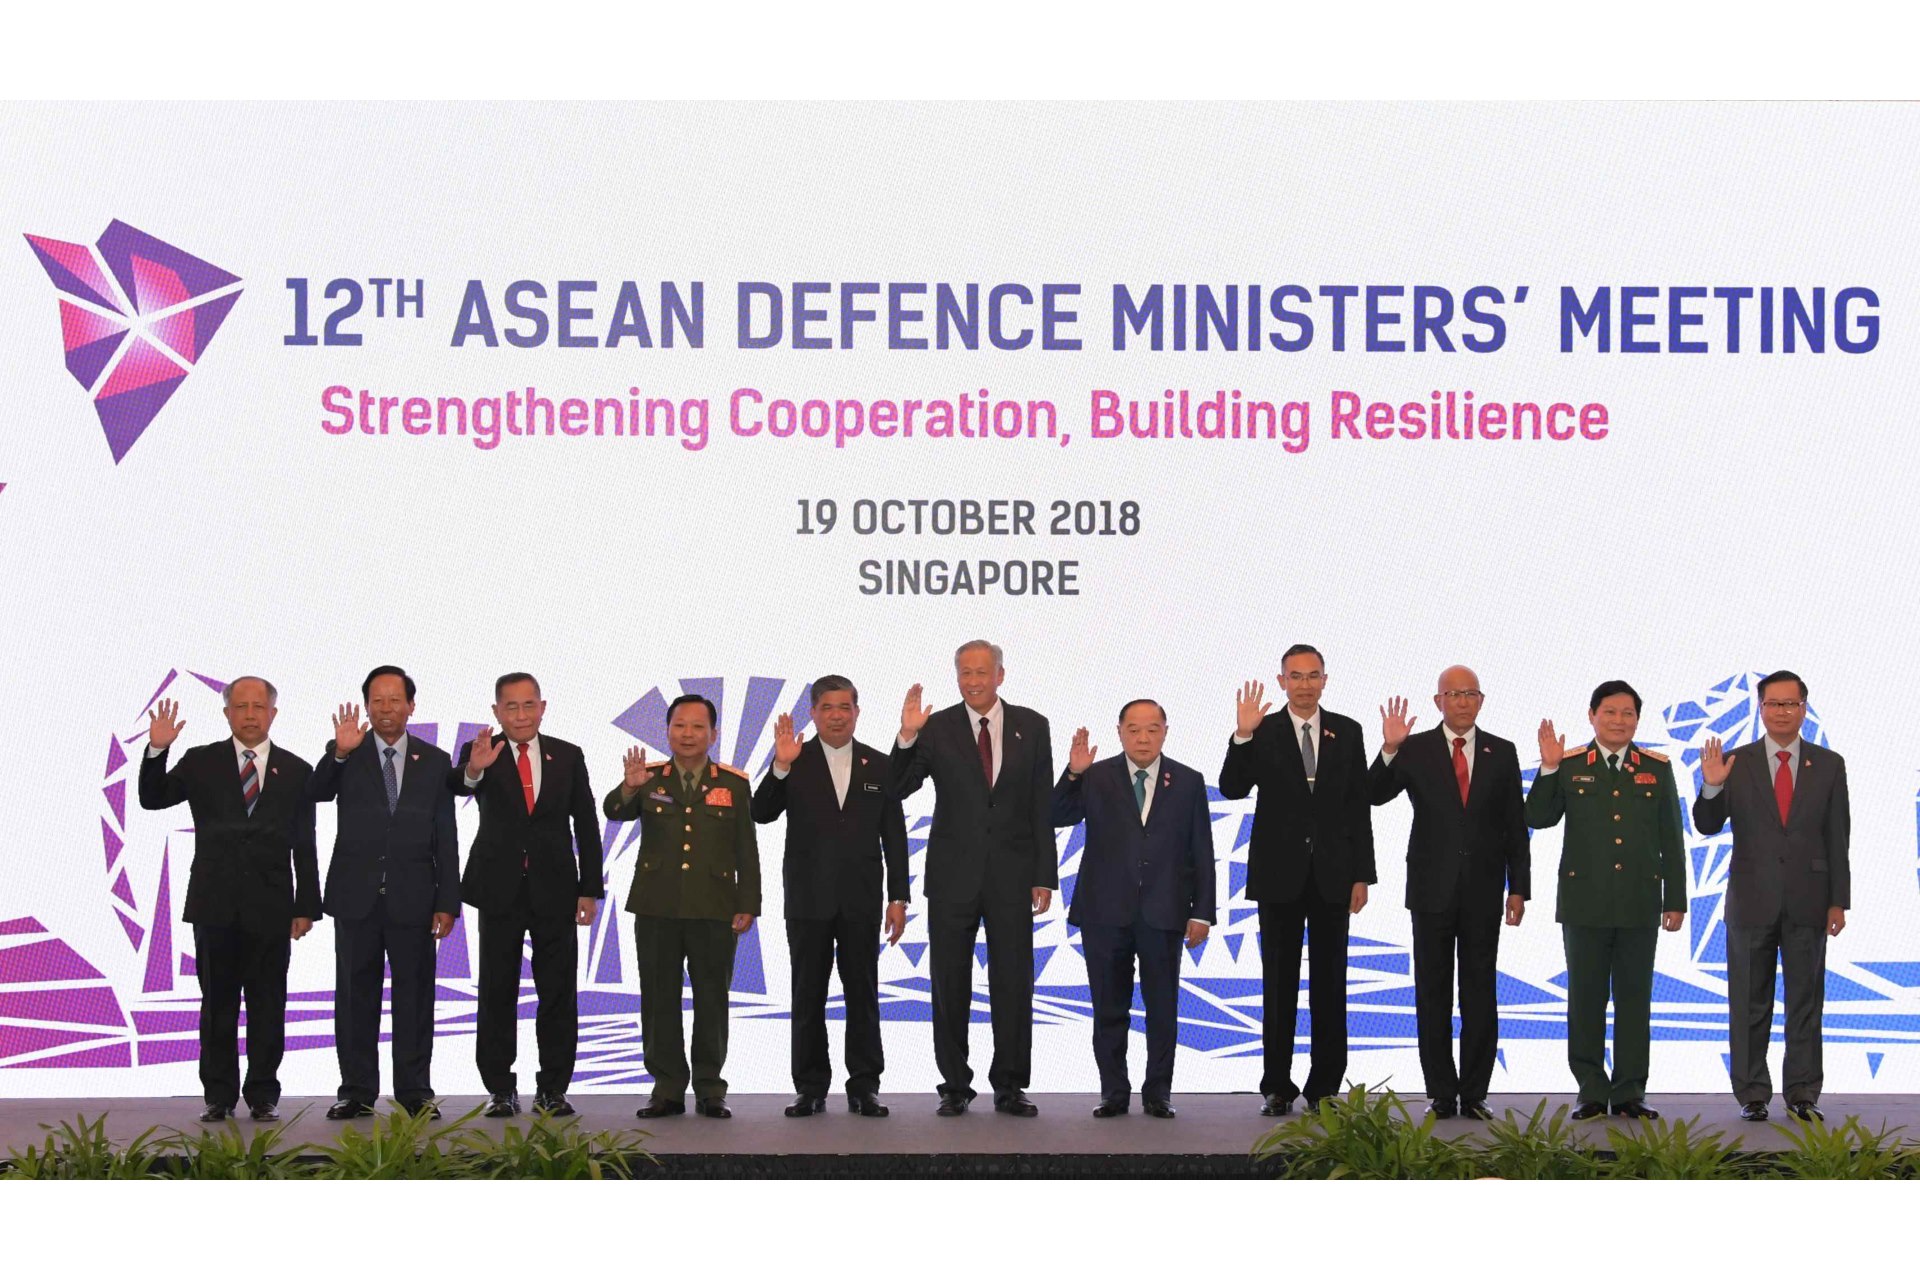 The ASEAN Defence Ministers attending the 12th ASEAN Defence Ministers' Meeting (ADMM) this morning.